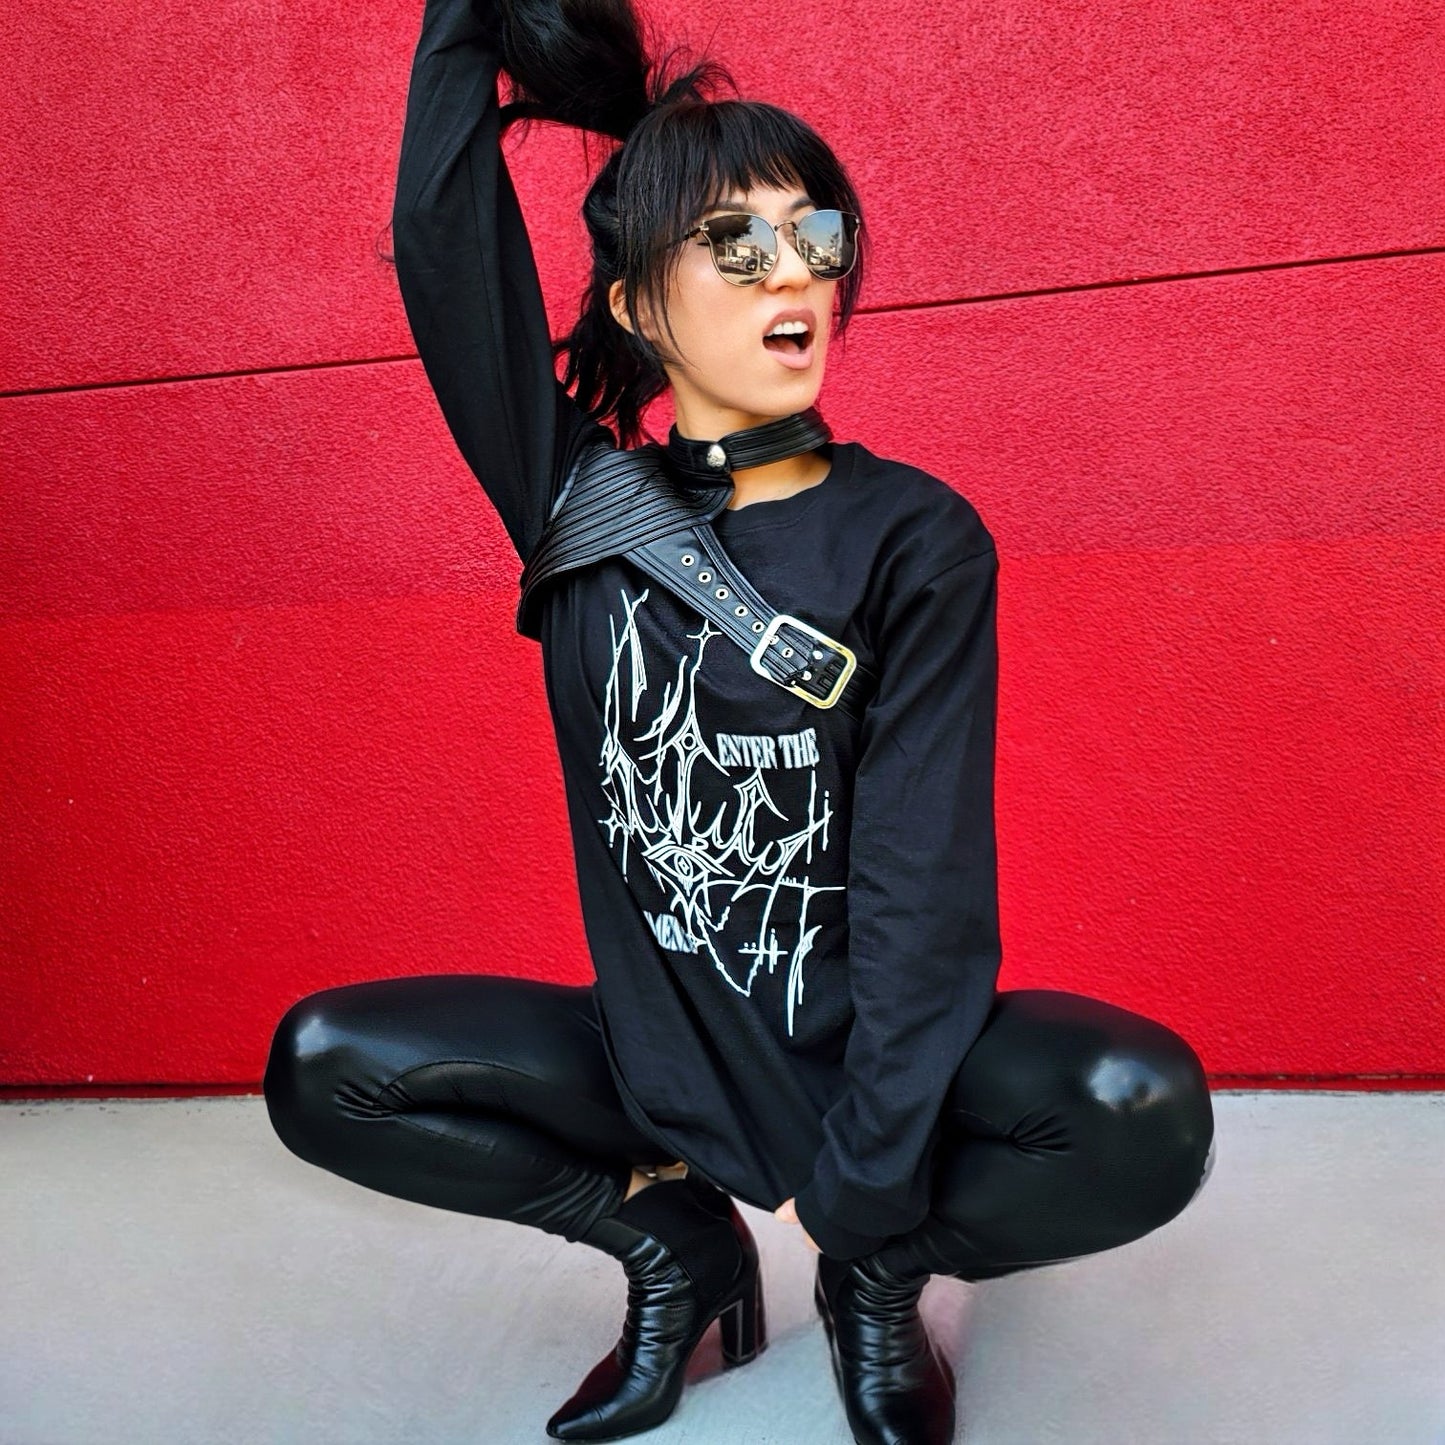 [ONLY 10 LEFT!] LIMITED: "6th Dimension" AZRA Merch Capsule Long Sleeve Unisex T-Shirt